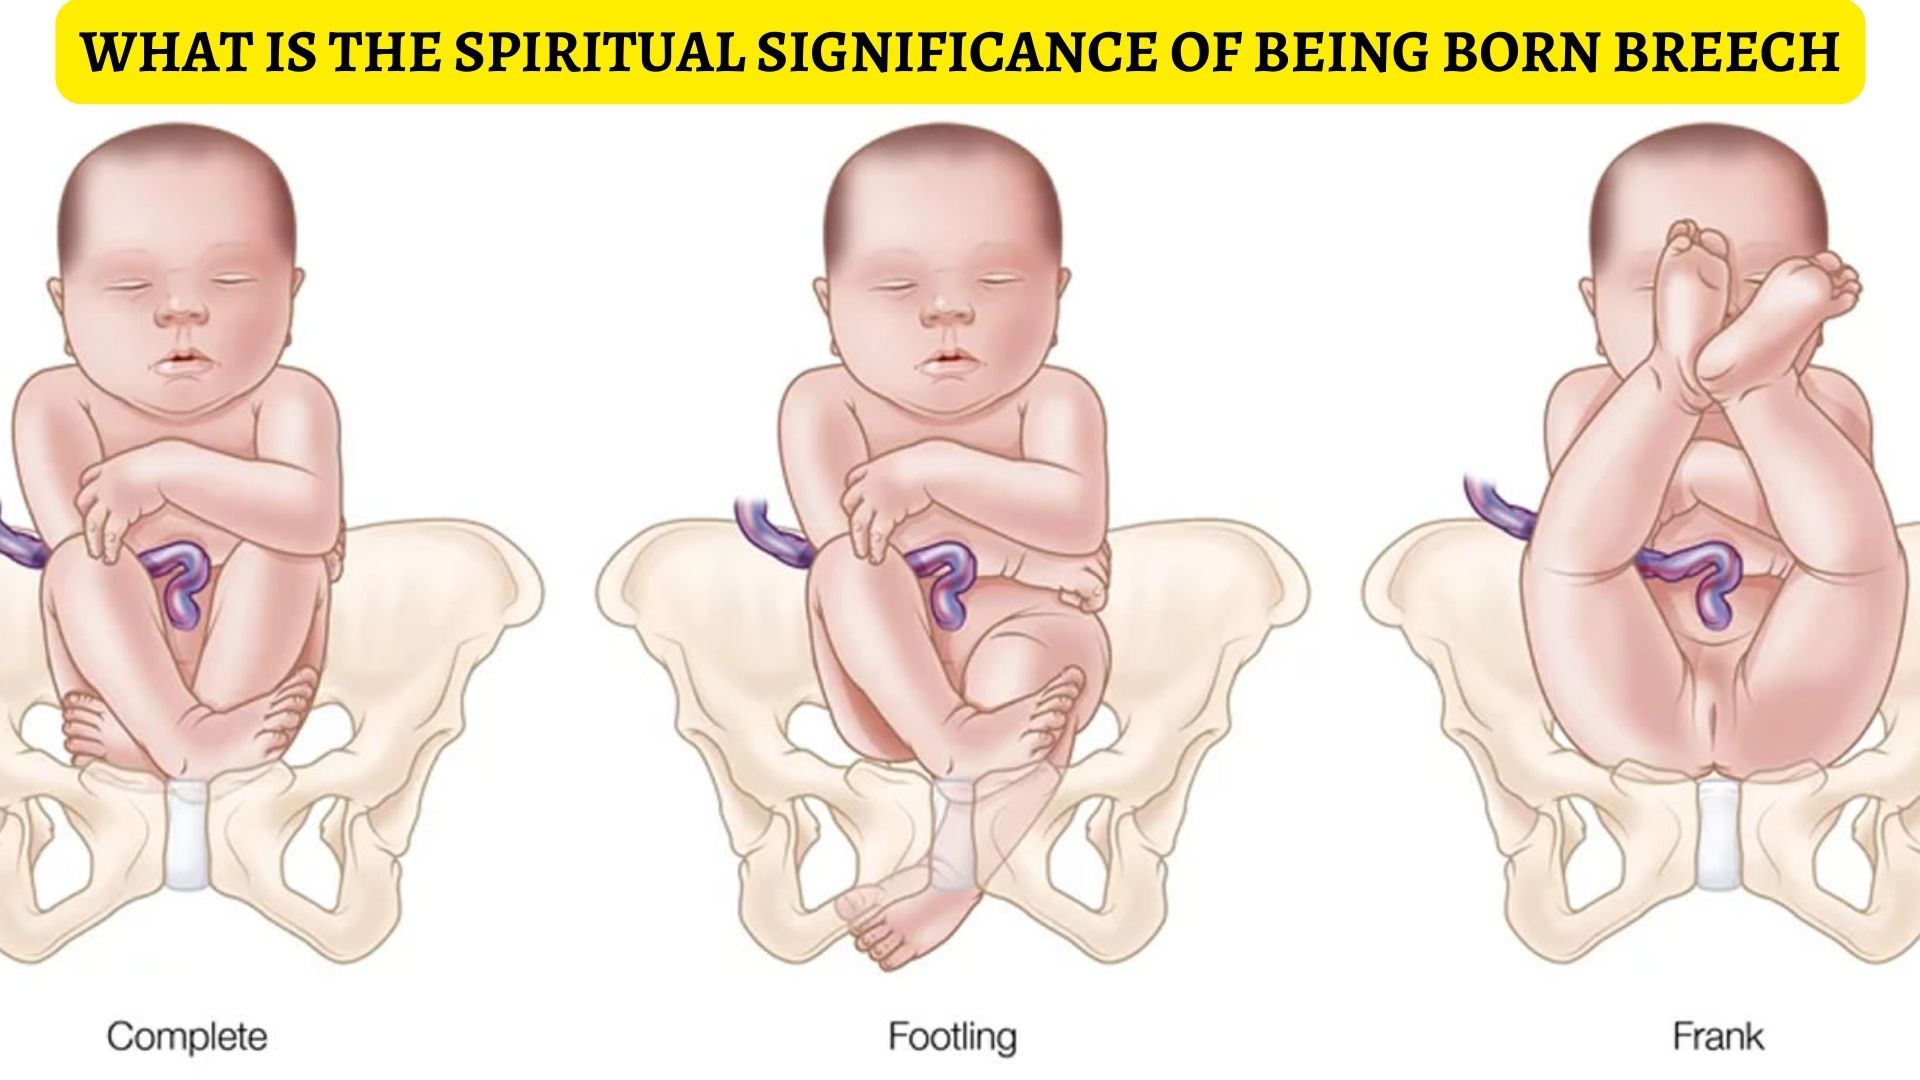 What Is The Spiritual Significance Of Being Born Breech?